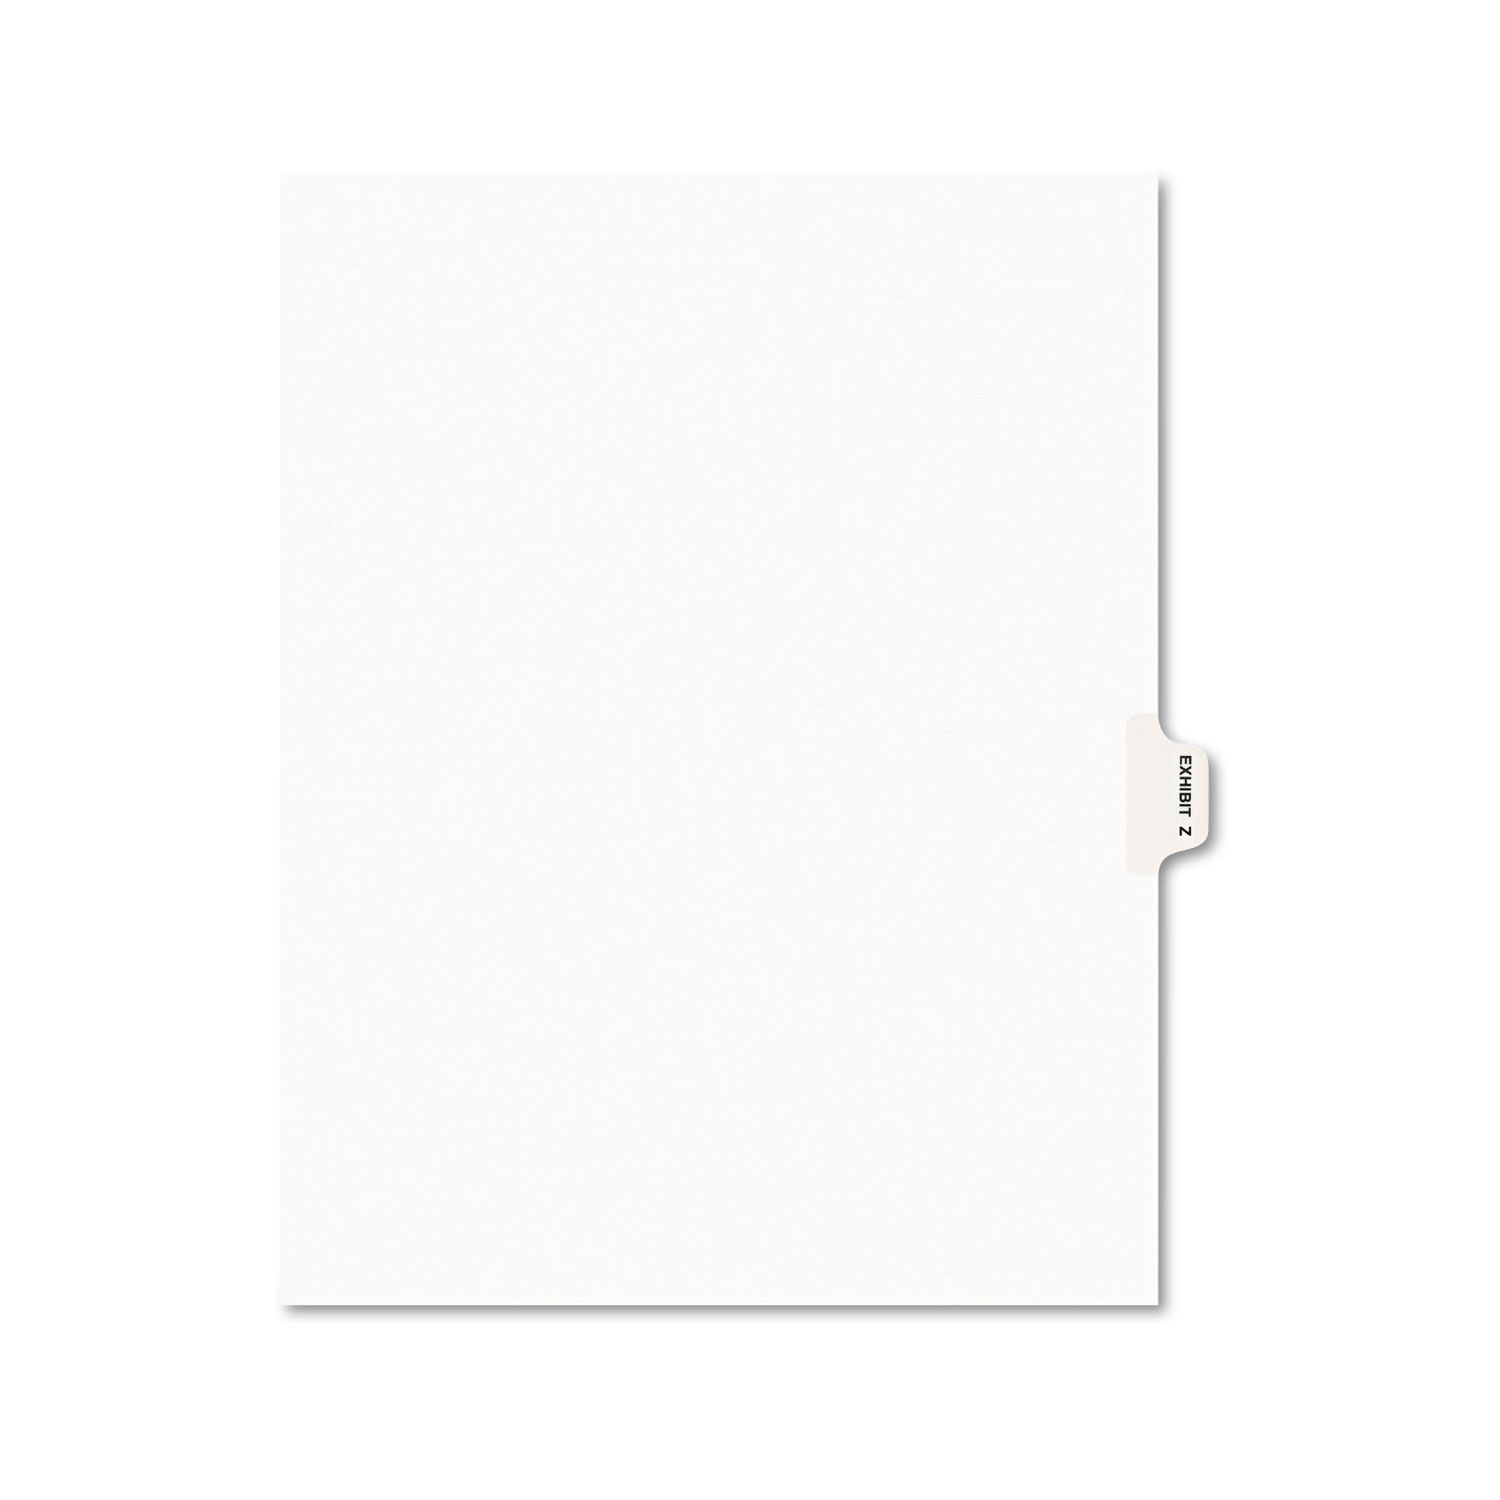  Avery 01396 Avery-Style Preprinted Legal Side Tab Divider, Exhibit Z, Letter, White, 25/Pack (AVE01396) 